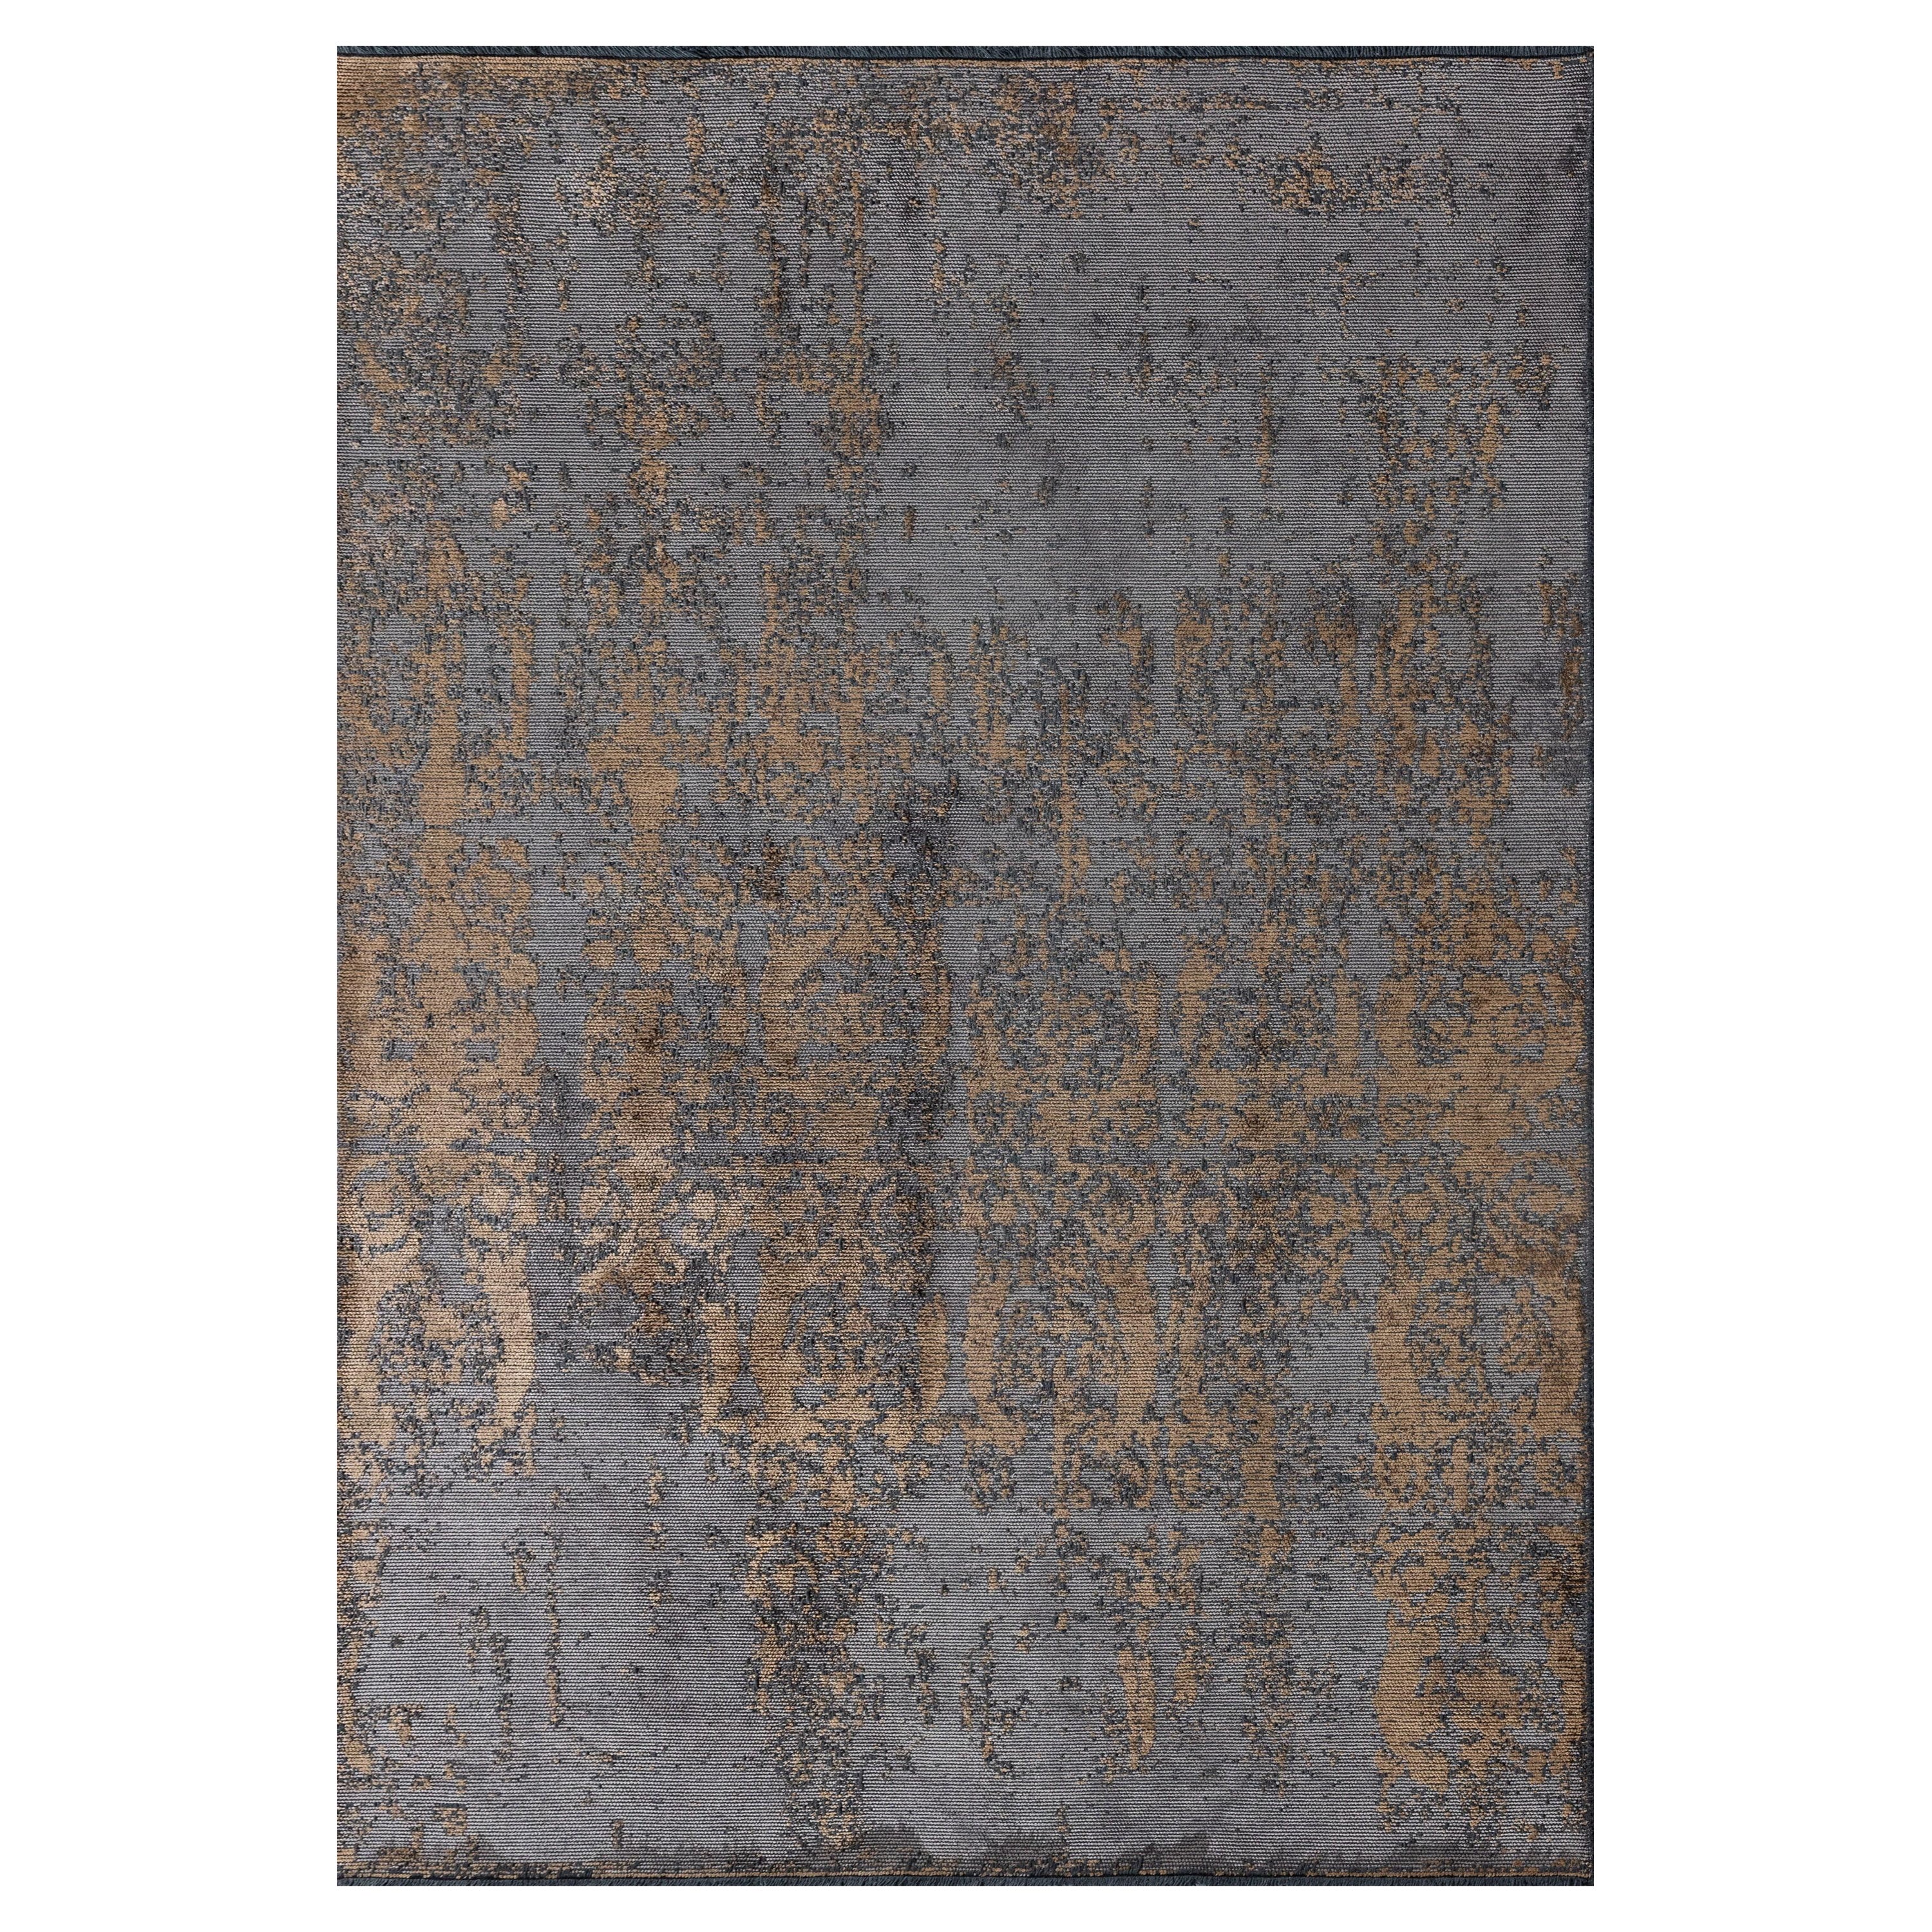 For Sale:  (Gray) Contemporary Damask Luxury Hand-Finished Area Rug